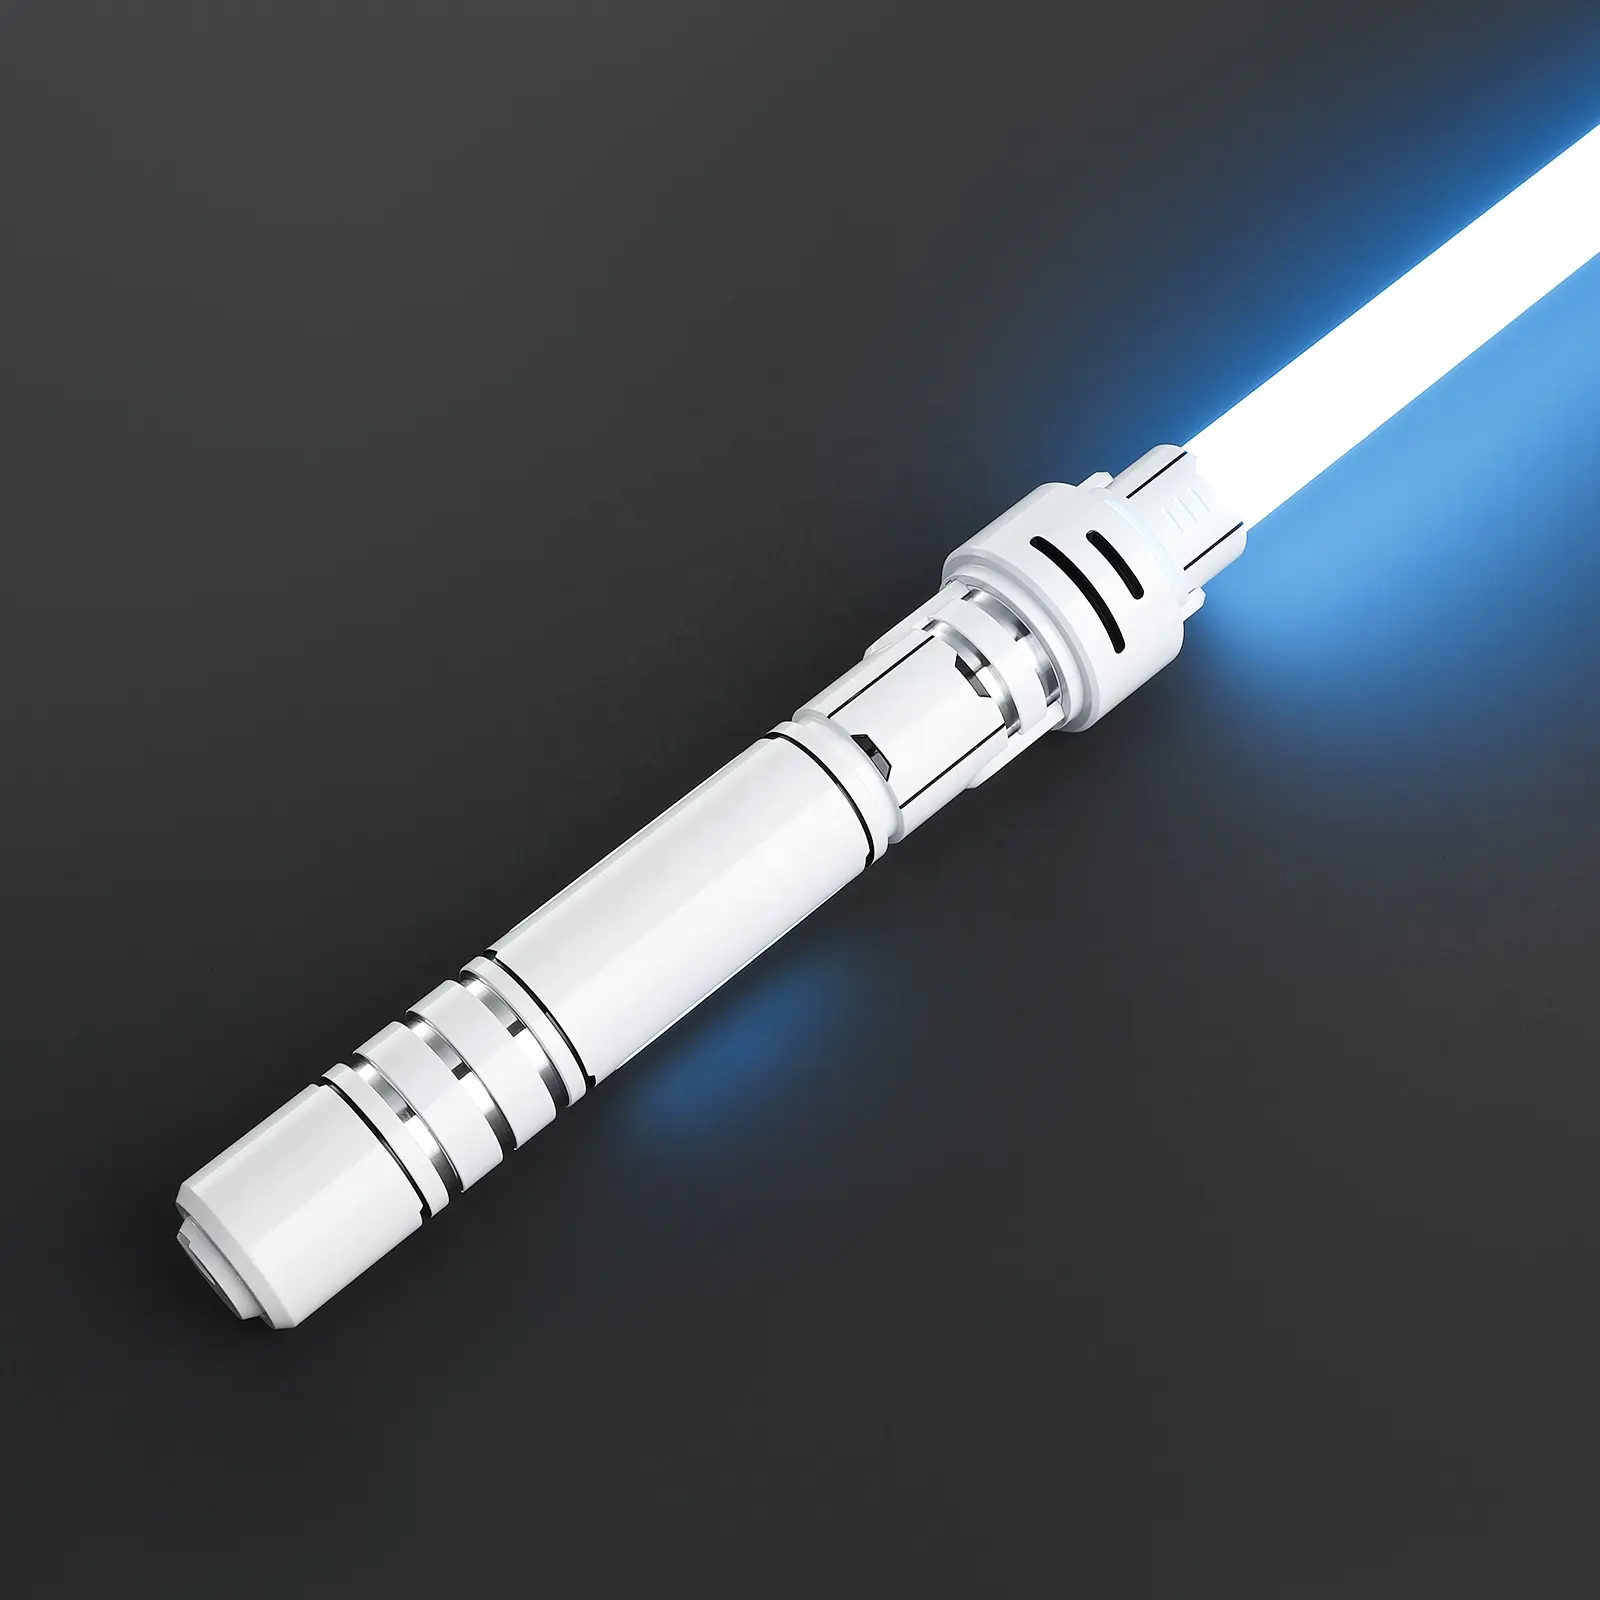 LGT Saberstudio White Soldier lightsaber heavy dueling RGB LED changing smooth swing laser sword for star the wars movie tool